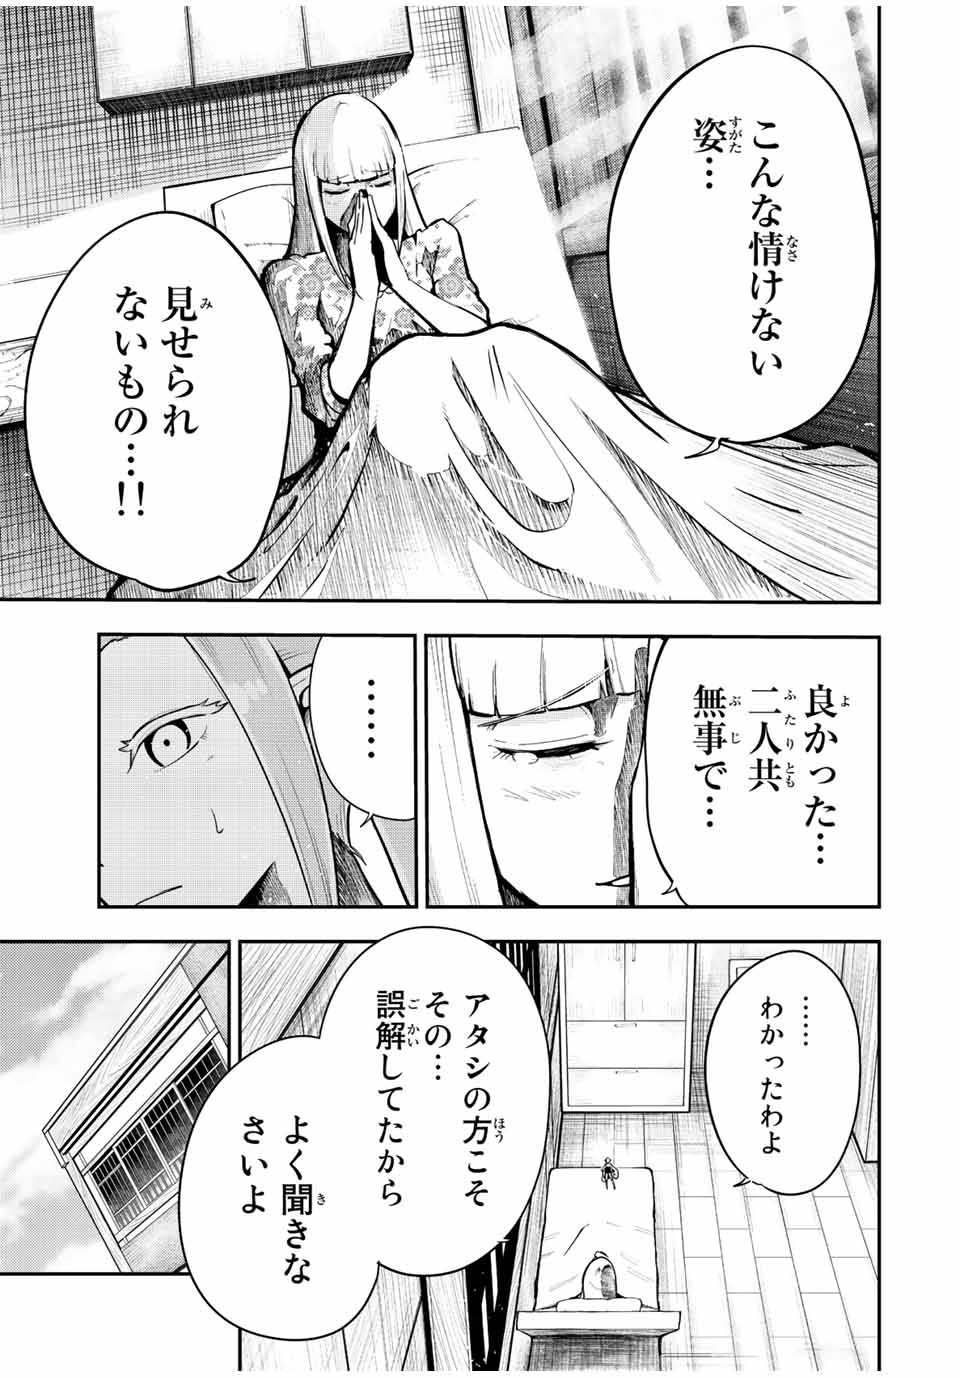 the strongest former prince-; 奴隷転生 ～その奴隷、最強の元王子につき～ 第78話 - Page 15